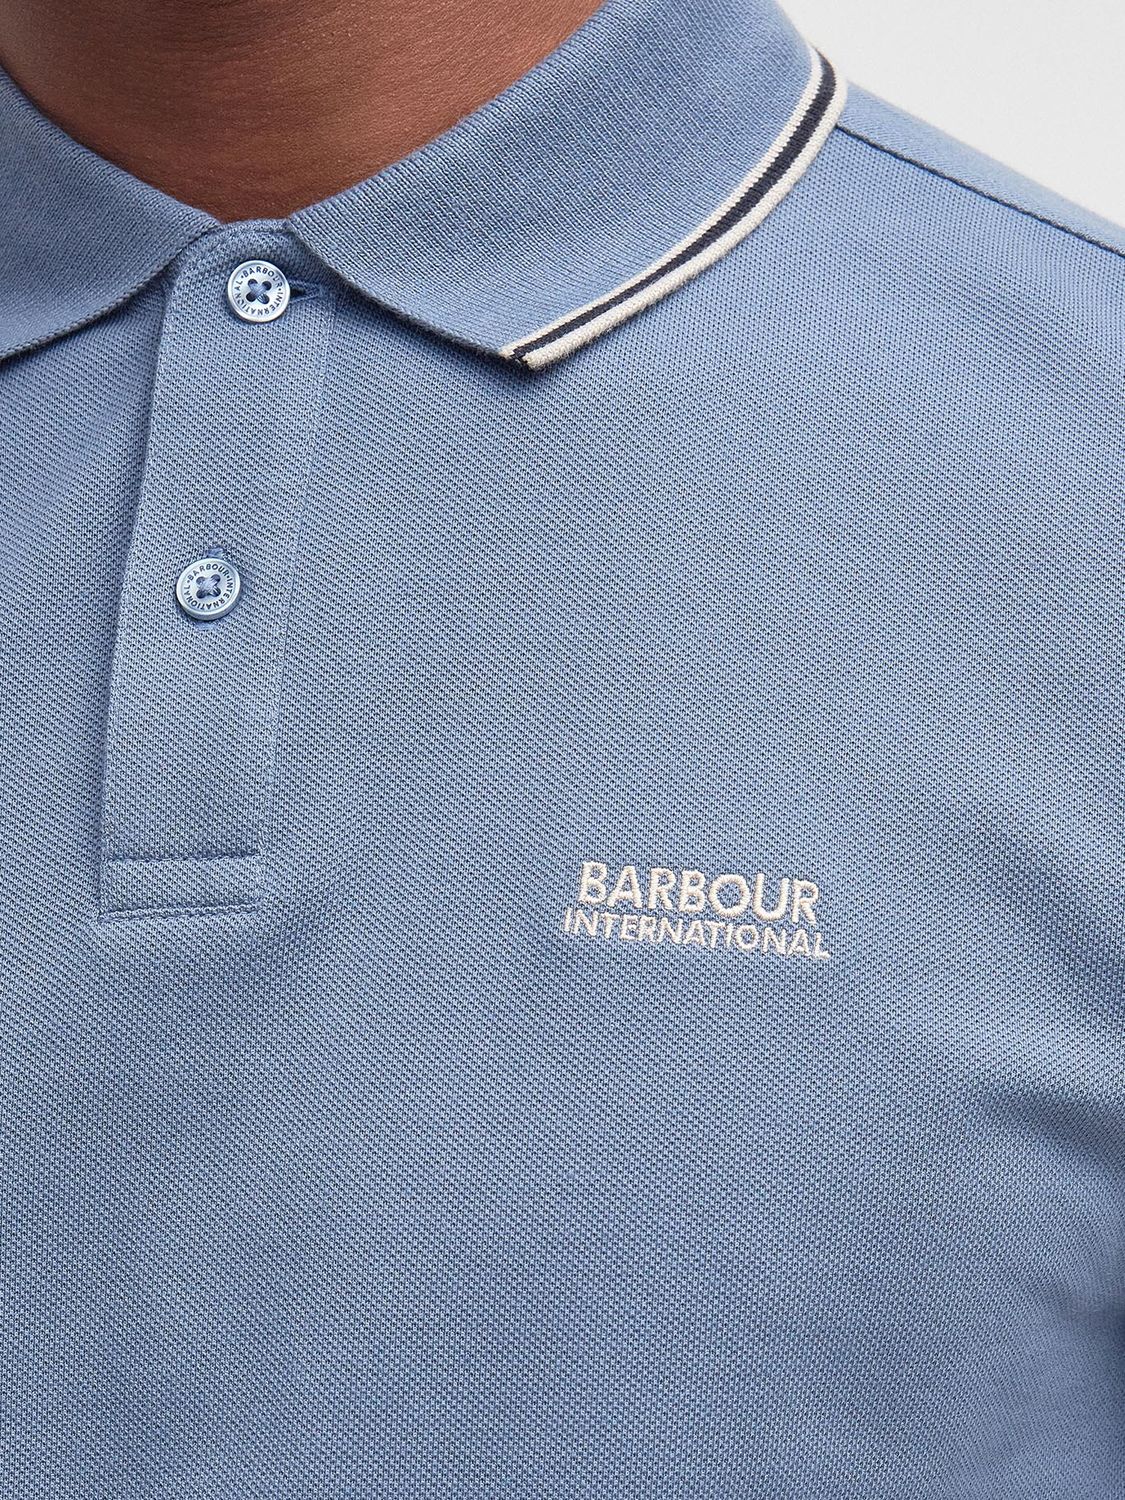 Barbour International Rider Tipped Polo Shirt, Dusty Blue, S